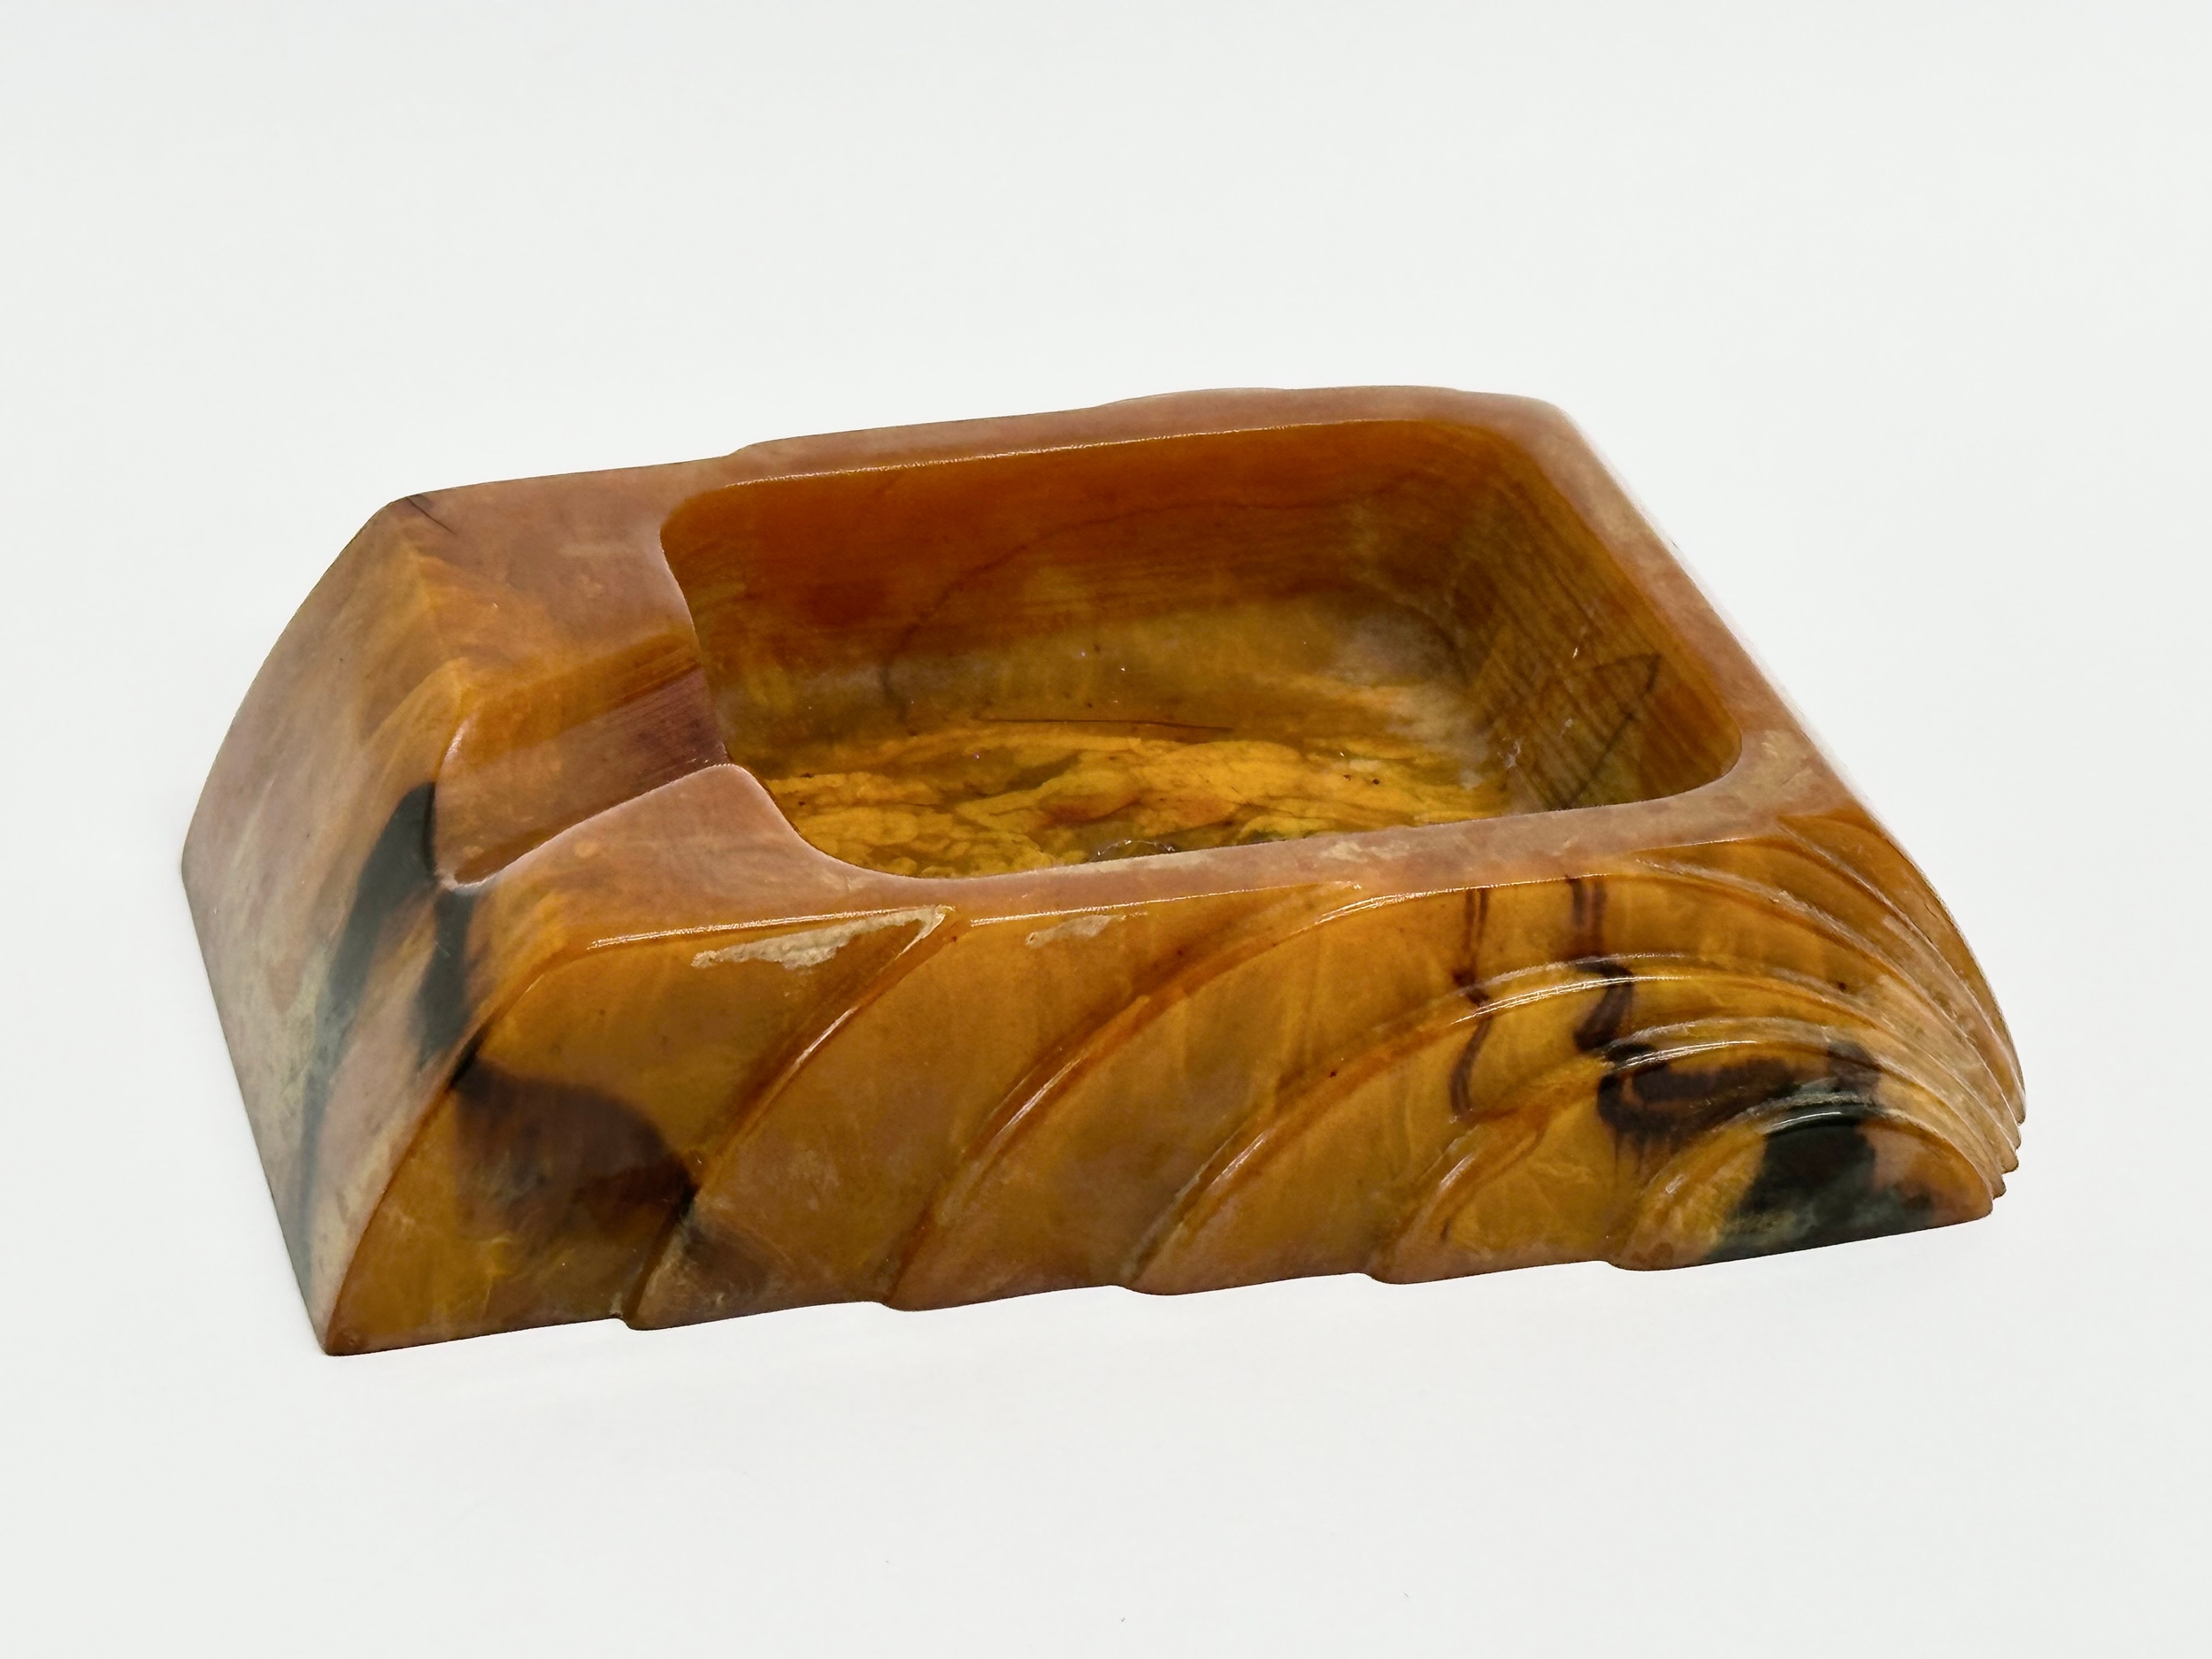 An Art Deco Butterscotch Phenolic Bakelite ashtray by Carvacraft. A Dickenson Product. 8x10cm - Image 3 of 4